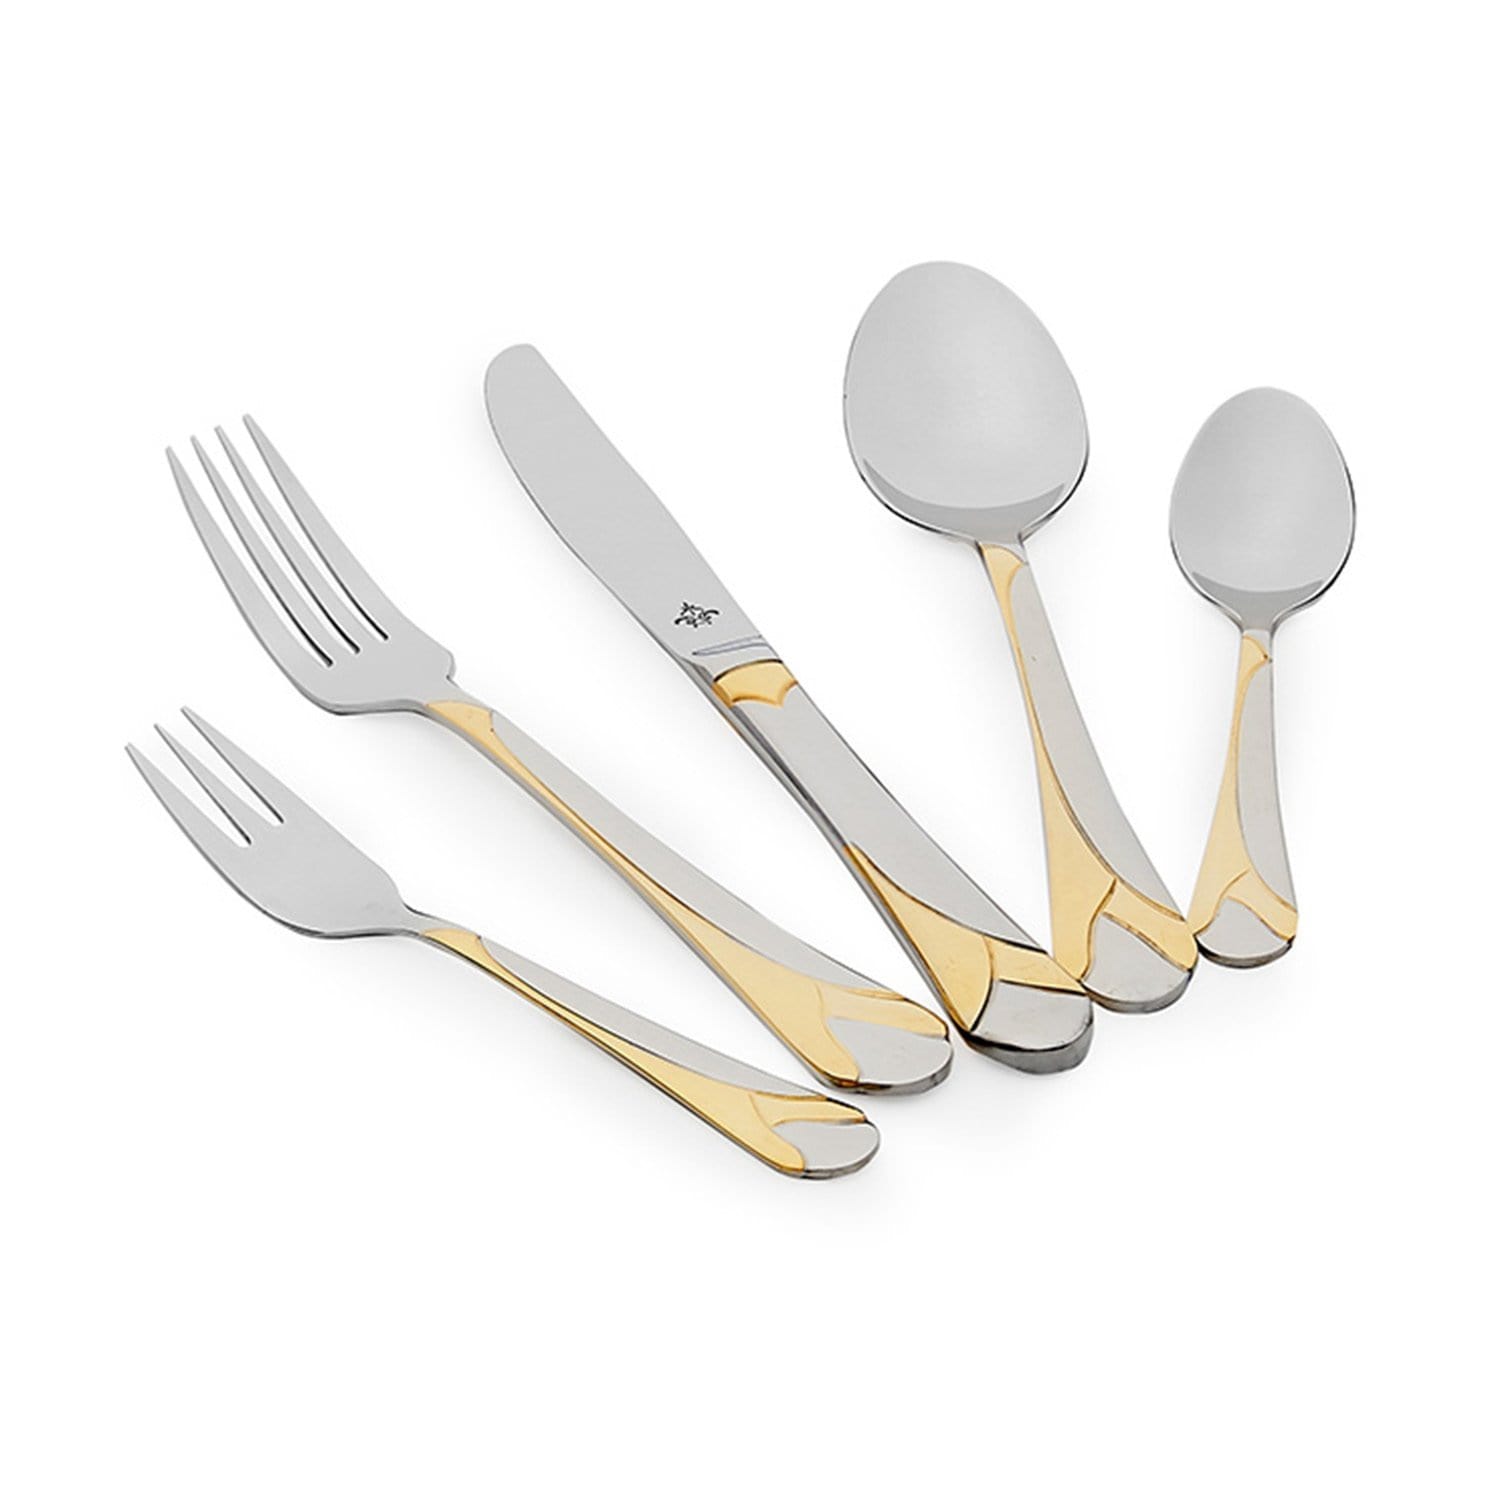 Elly Gold Plated Cutlery Set - Silver, 68 Piece - GL56/GPBX - Jashanmal Home